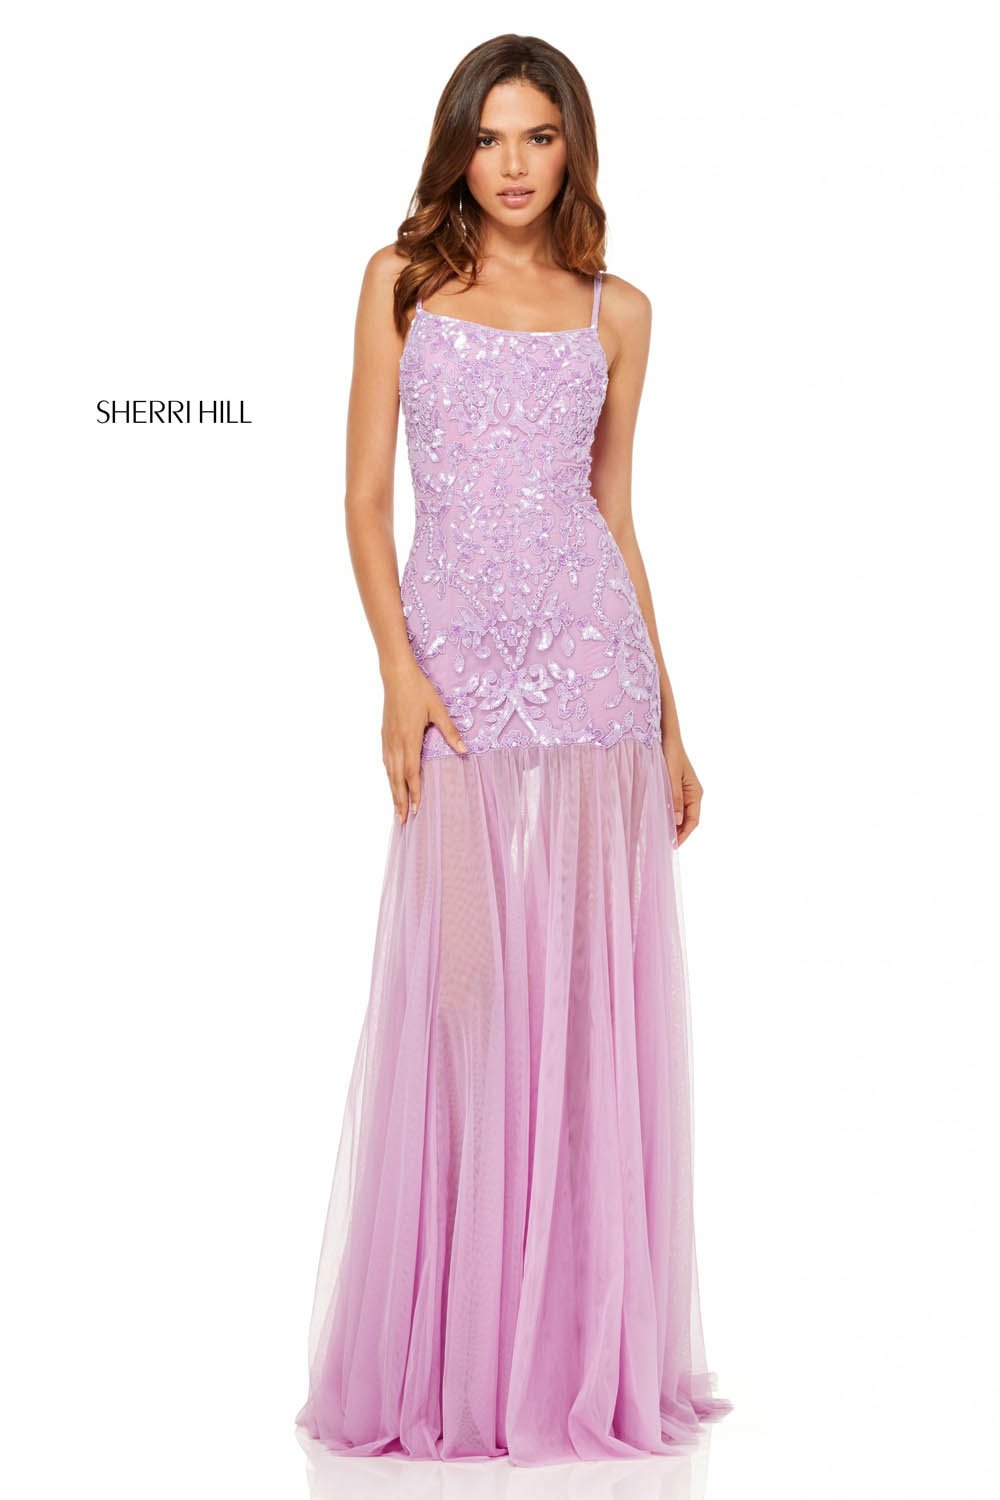 Sherri Hill 52677 dress images in these colors: Lilac, Ivory, Light Pink, Aqua, Light Blue, Light Yellow, Coral.